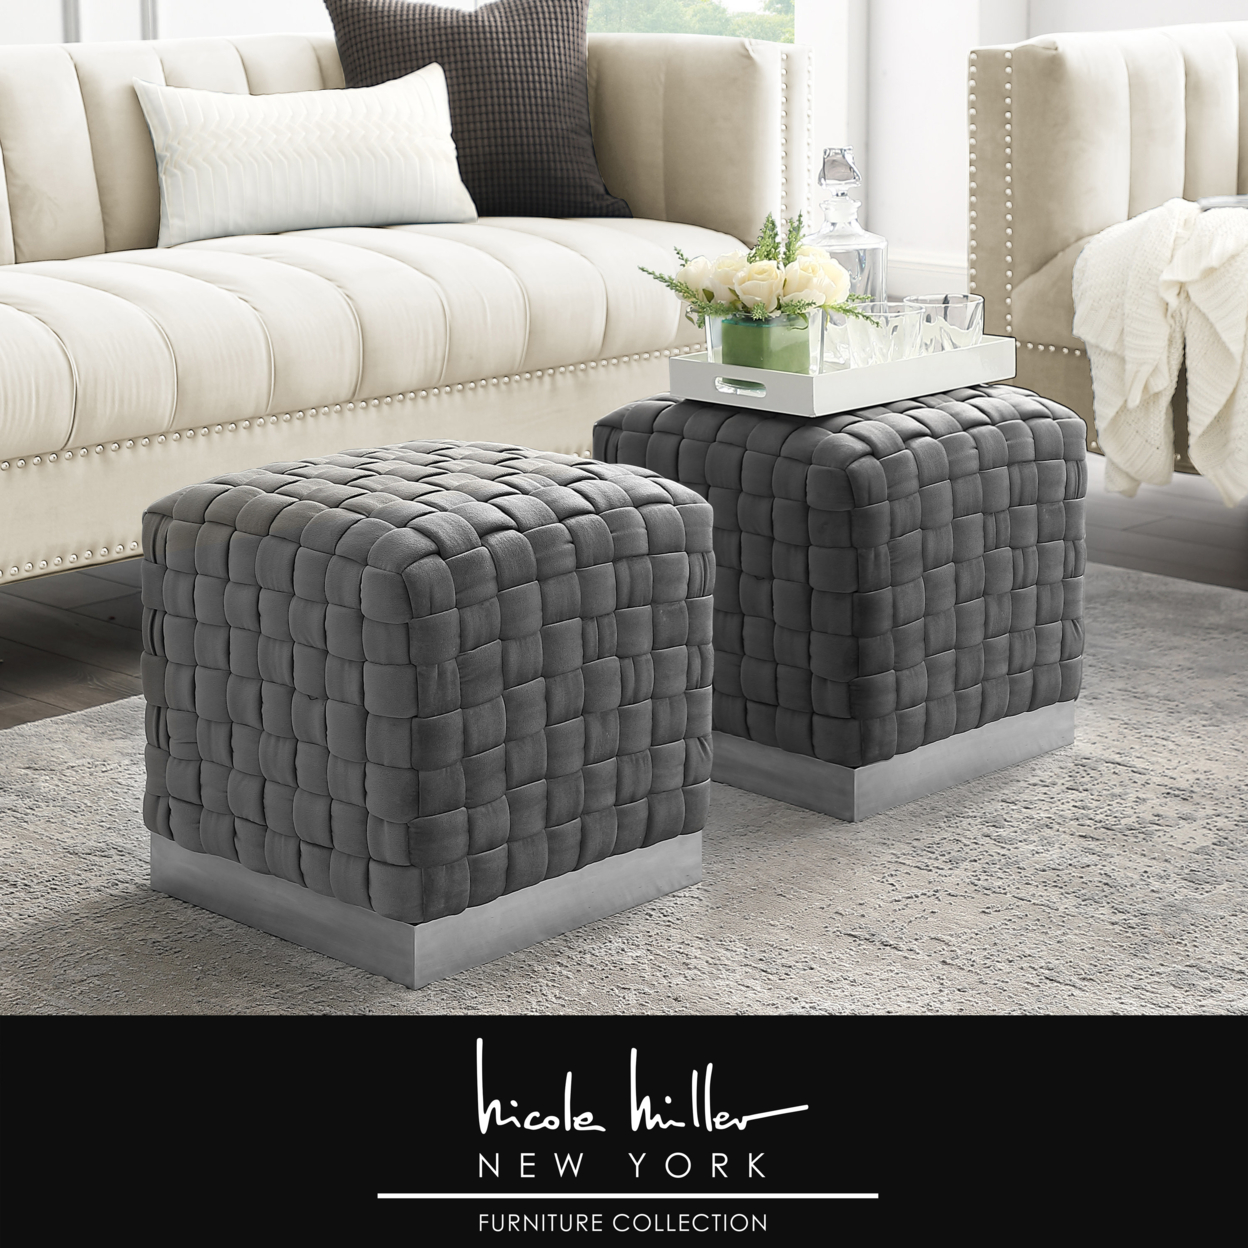 Griffin Velvet Woven Cube Ottoman-Luxurious Upholstery- Stainless Steel Base-1 PC-By Nicole Miller - Grey/ Chrome